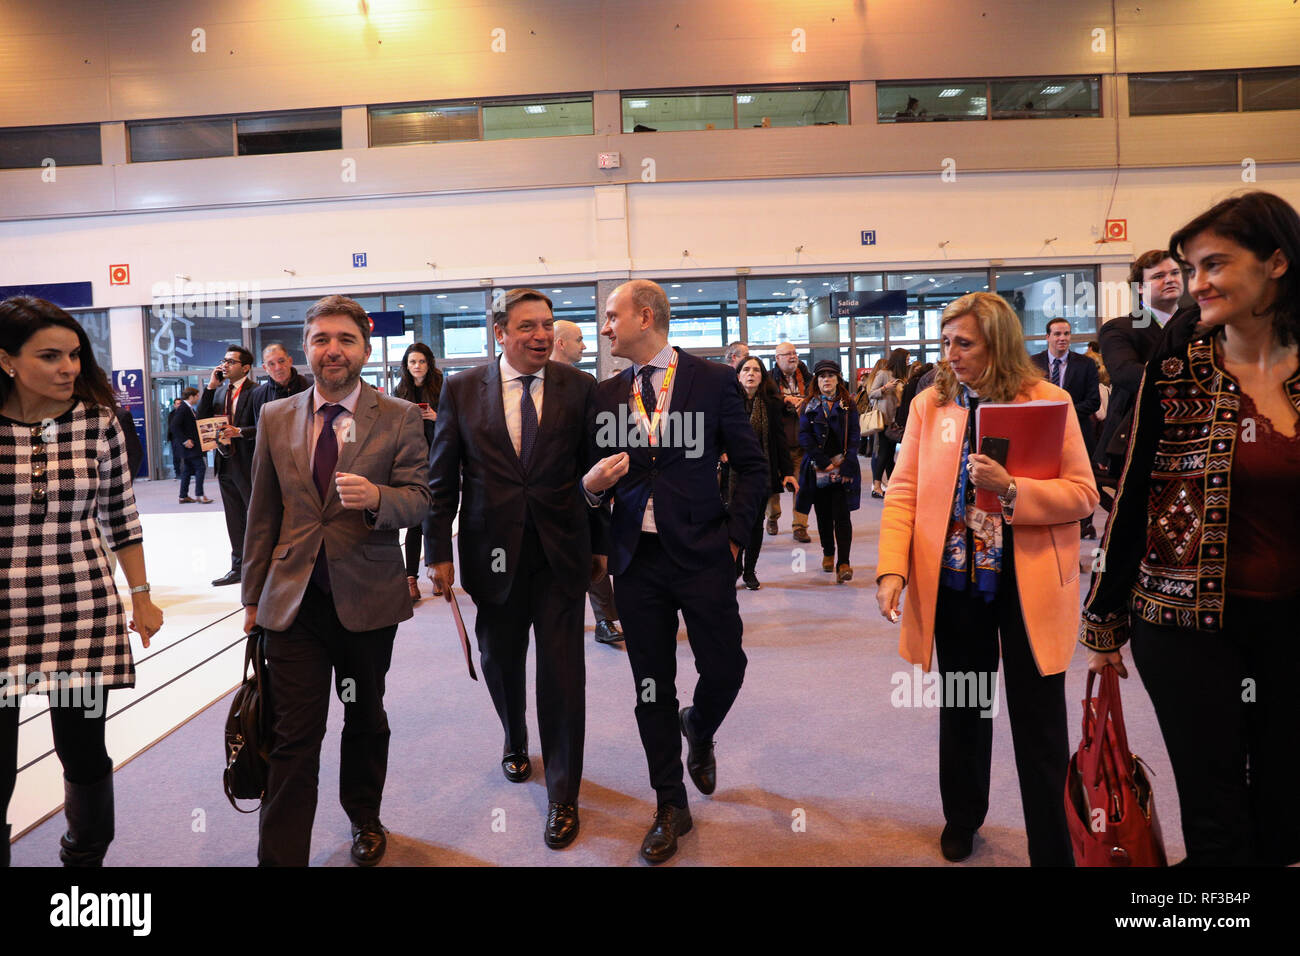 Madrid, Spain. 24th Jan, 2019. Minister of Agriculture, Fisheries and Food, Luis Planas ppears chatting and visiting different stands of the fair. Minister of Agriculture, Fisheries and Food, Luis Planas makes an official visit to the tourism fair FITUR 2019 in Madrid visiting various stands. Credit: Jesús Hellin/Alamy Live News Stock Photo